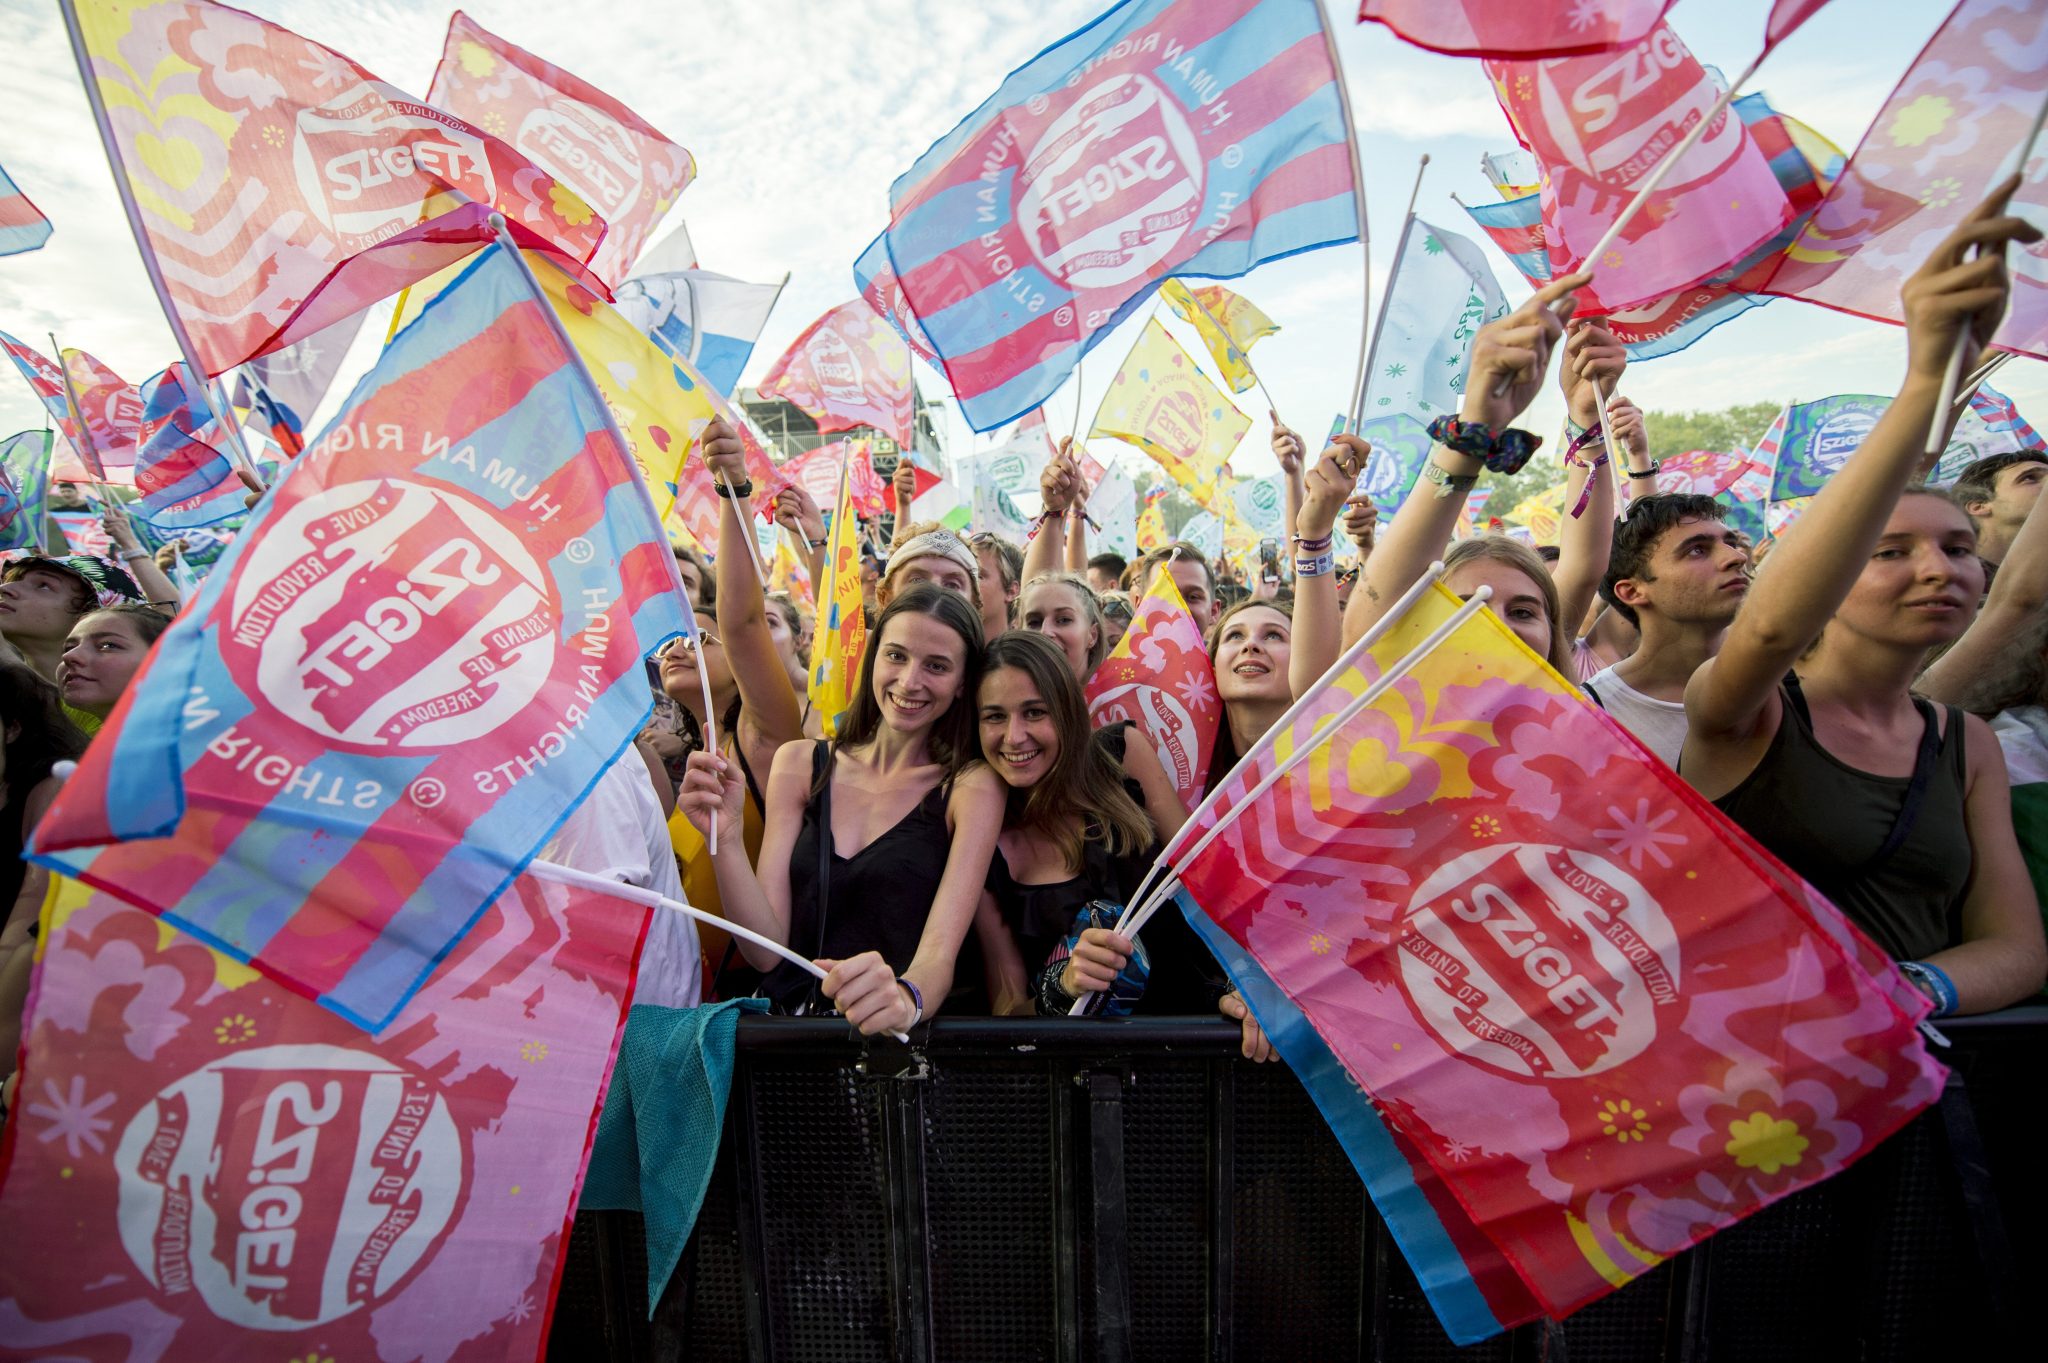 Sziget Festival to Return after 2-Year Covid Hiatus with Arctic Monkeys, Dua Lipa, and Others